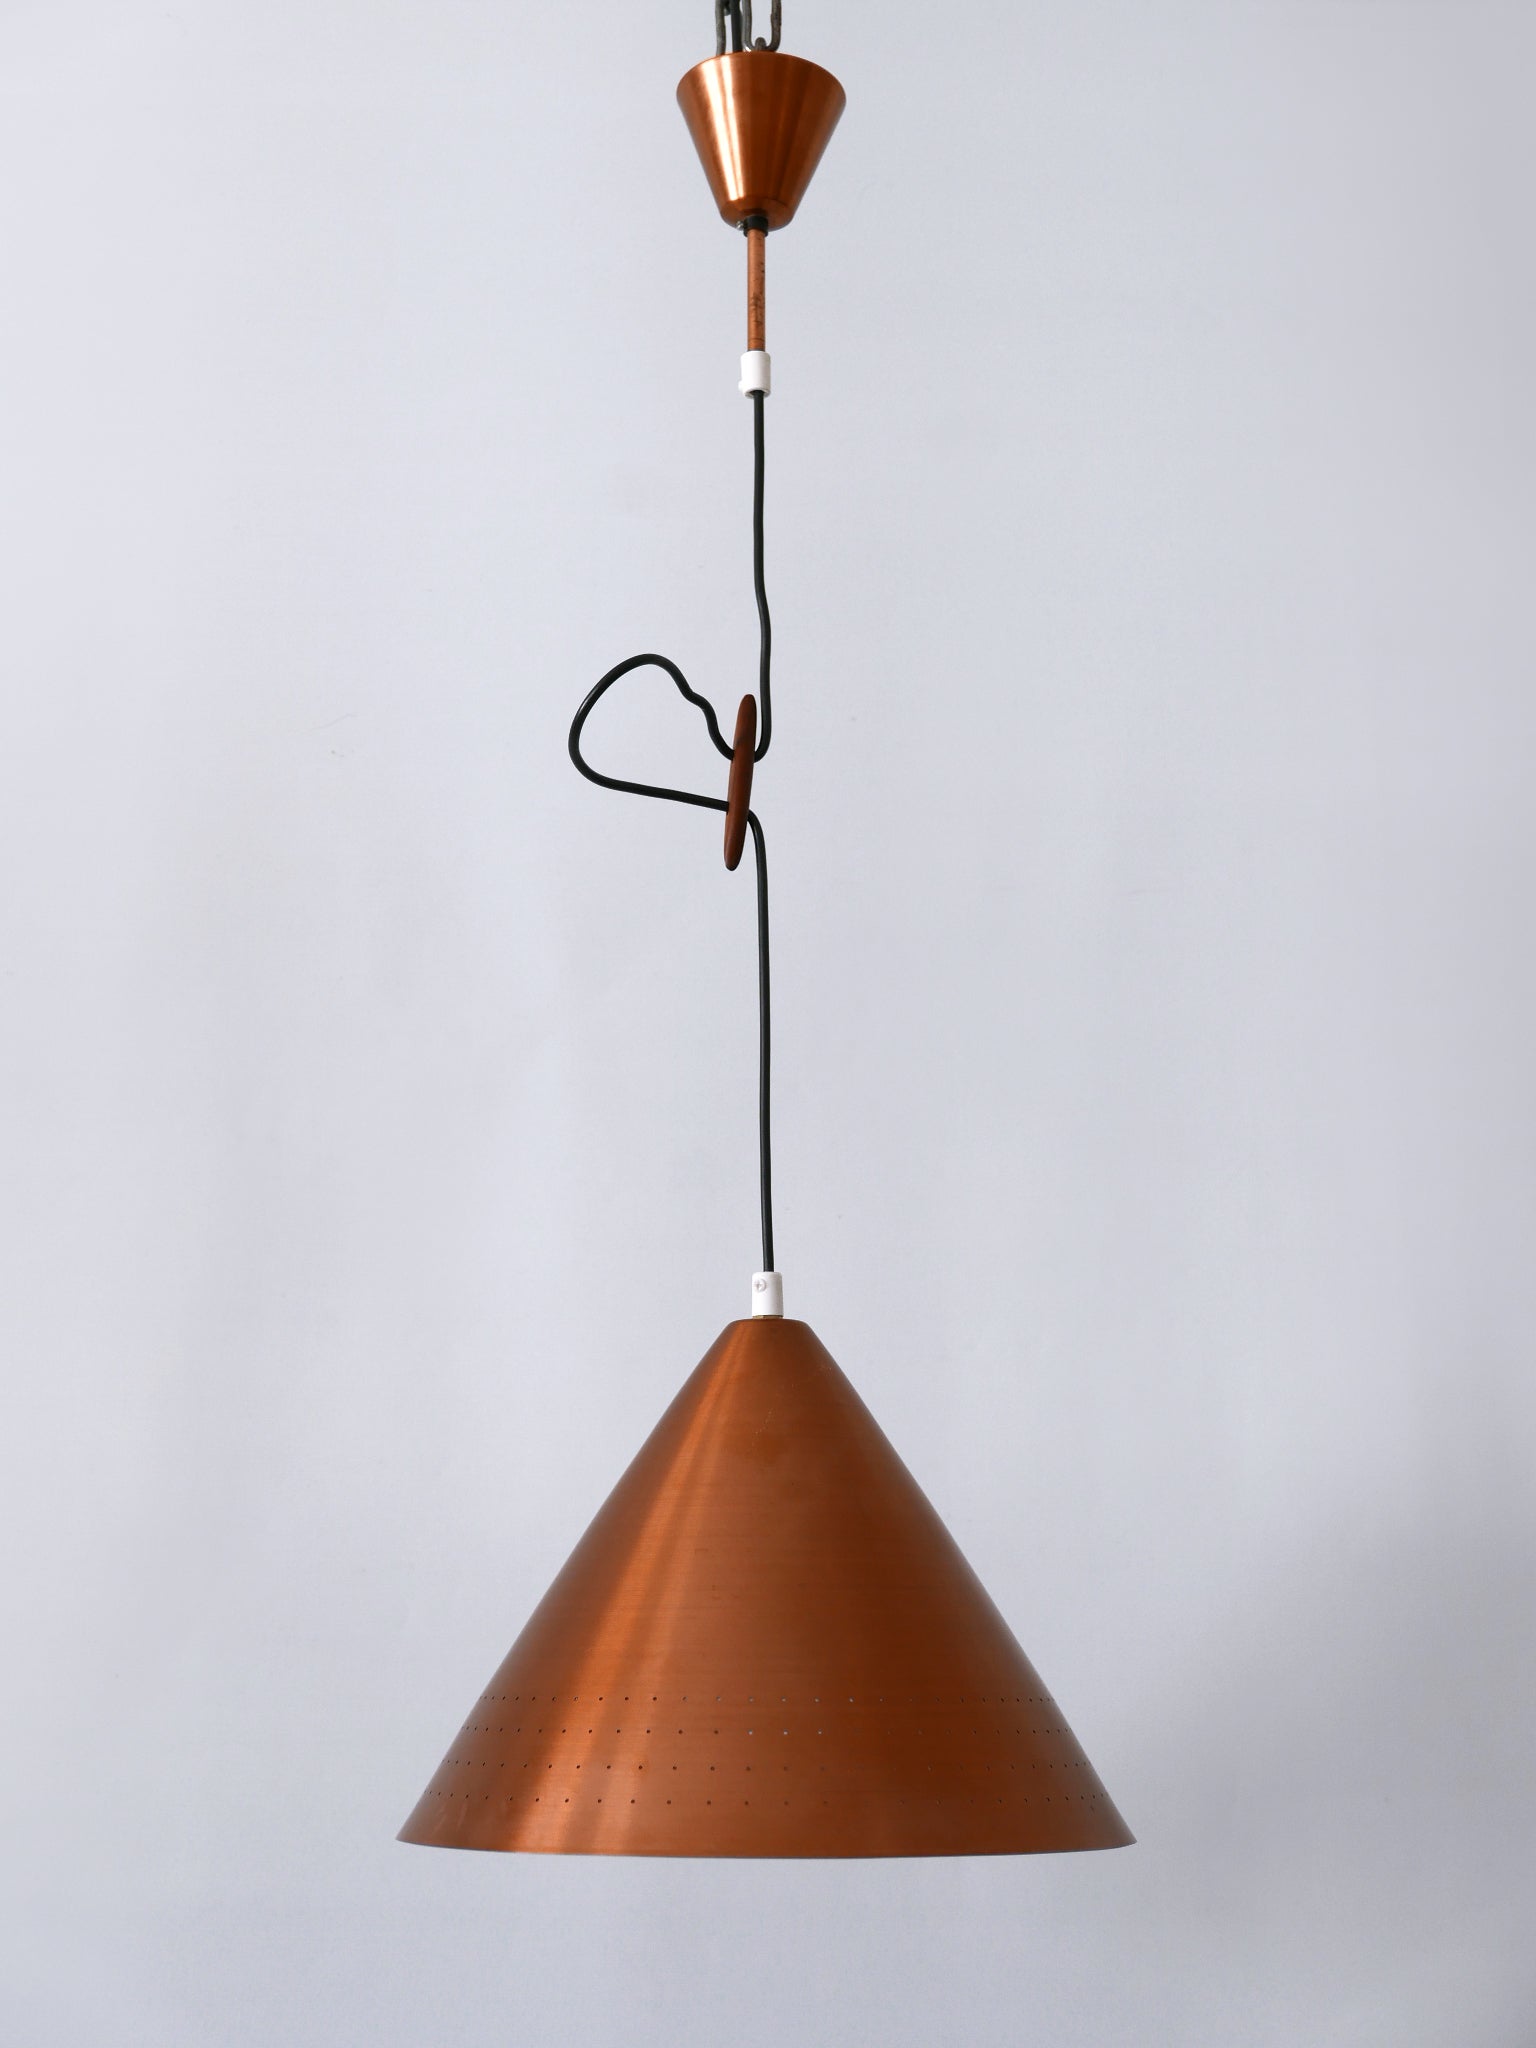 Rare, elegant and highly decorative Mid-Century Modern perforated copper pendant lamp or hanging light. Designed and manufactured probably in Scandinavia in 1960s.

Executed in perforated copper sheet, the pendant lamp needs 1 x E27 / E26 Edison